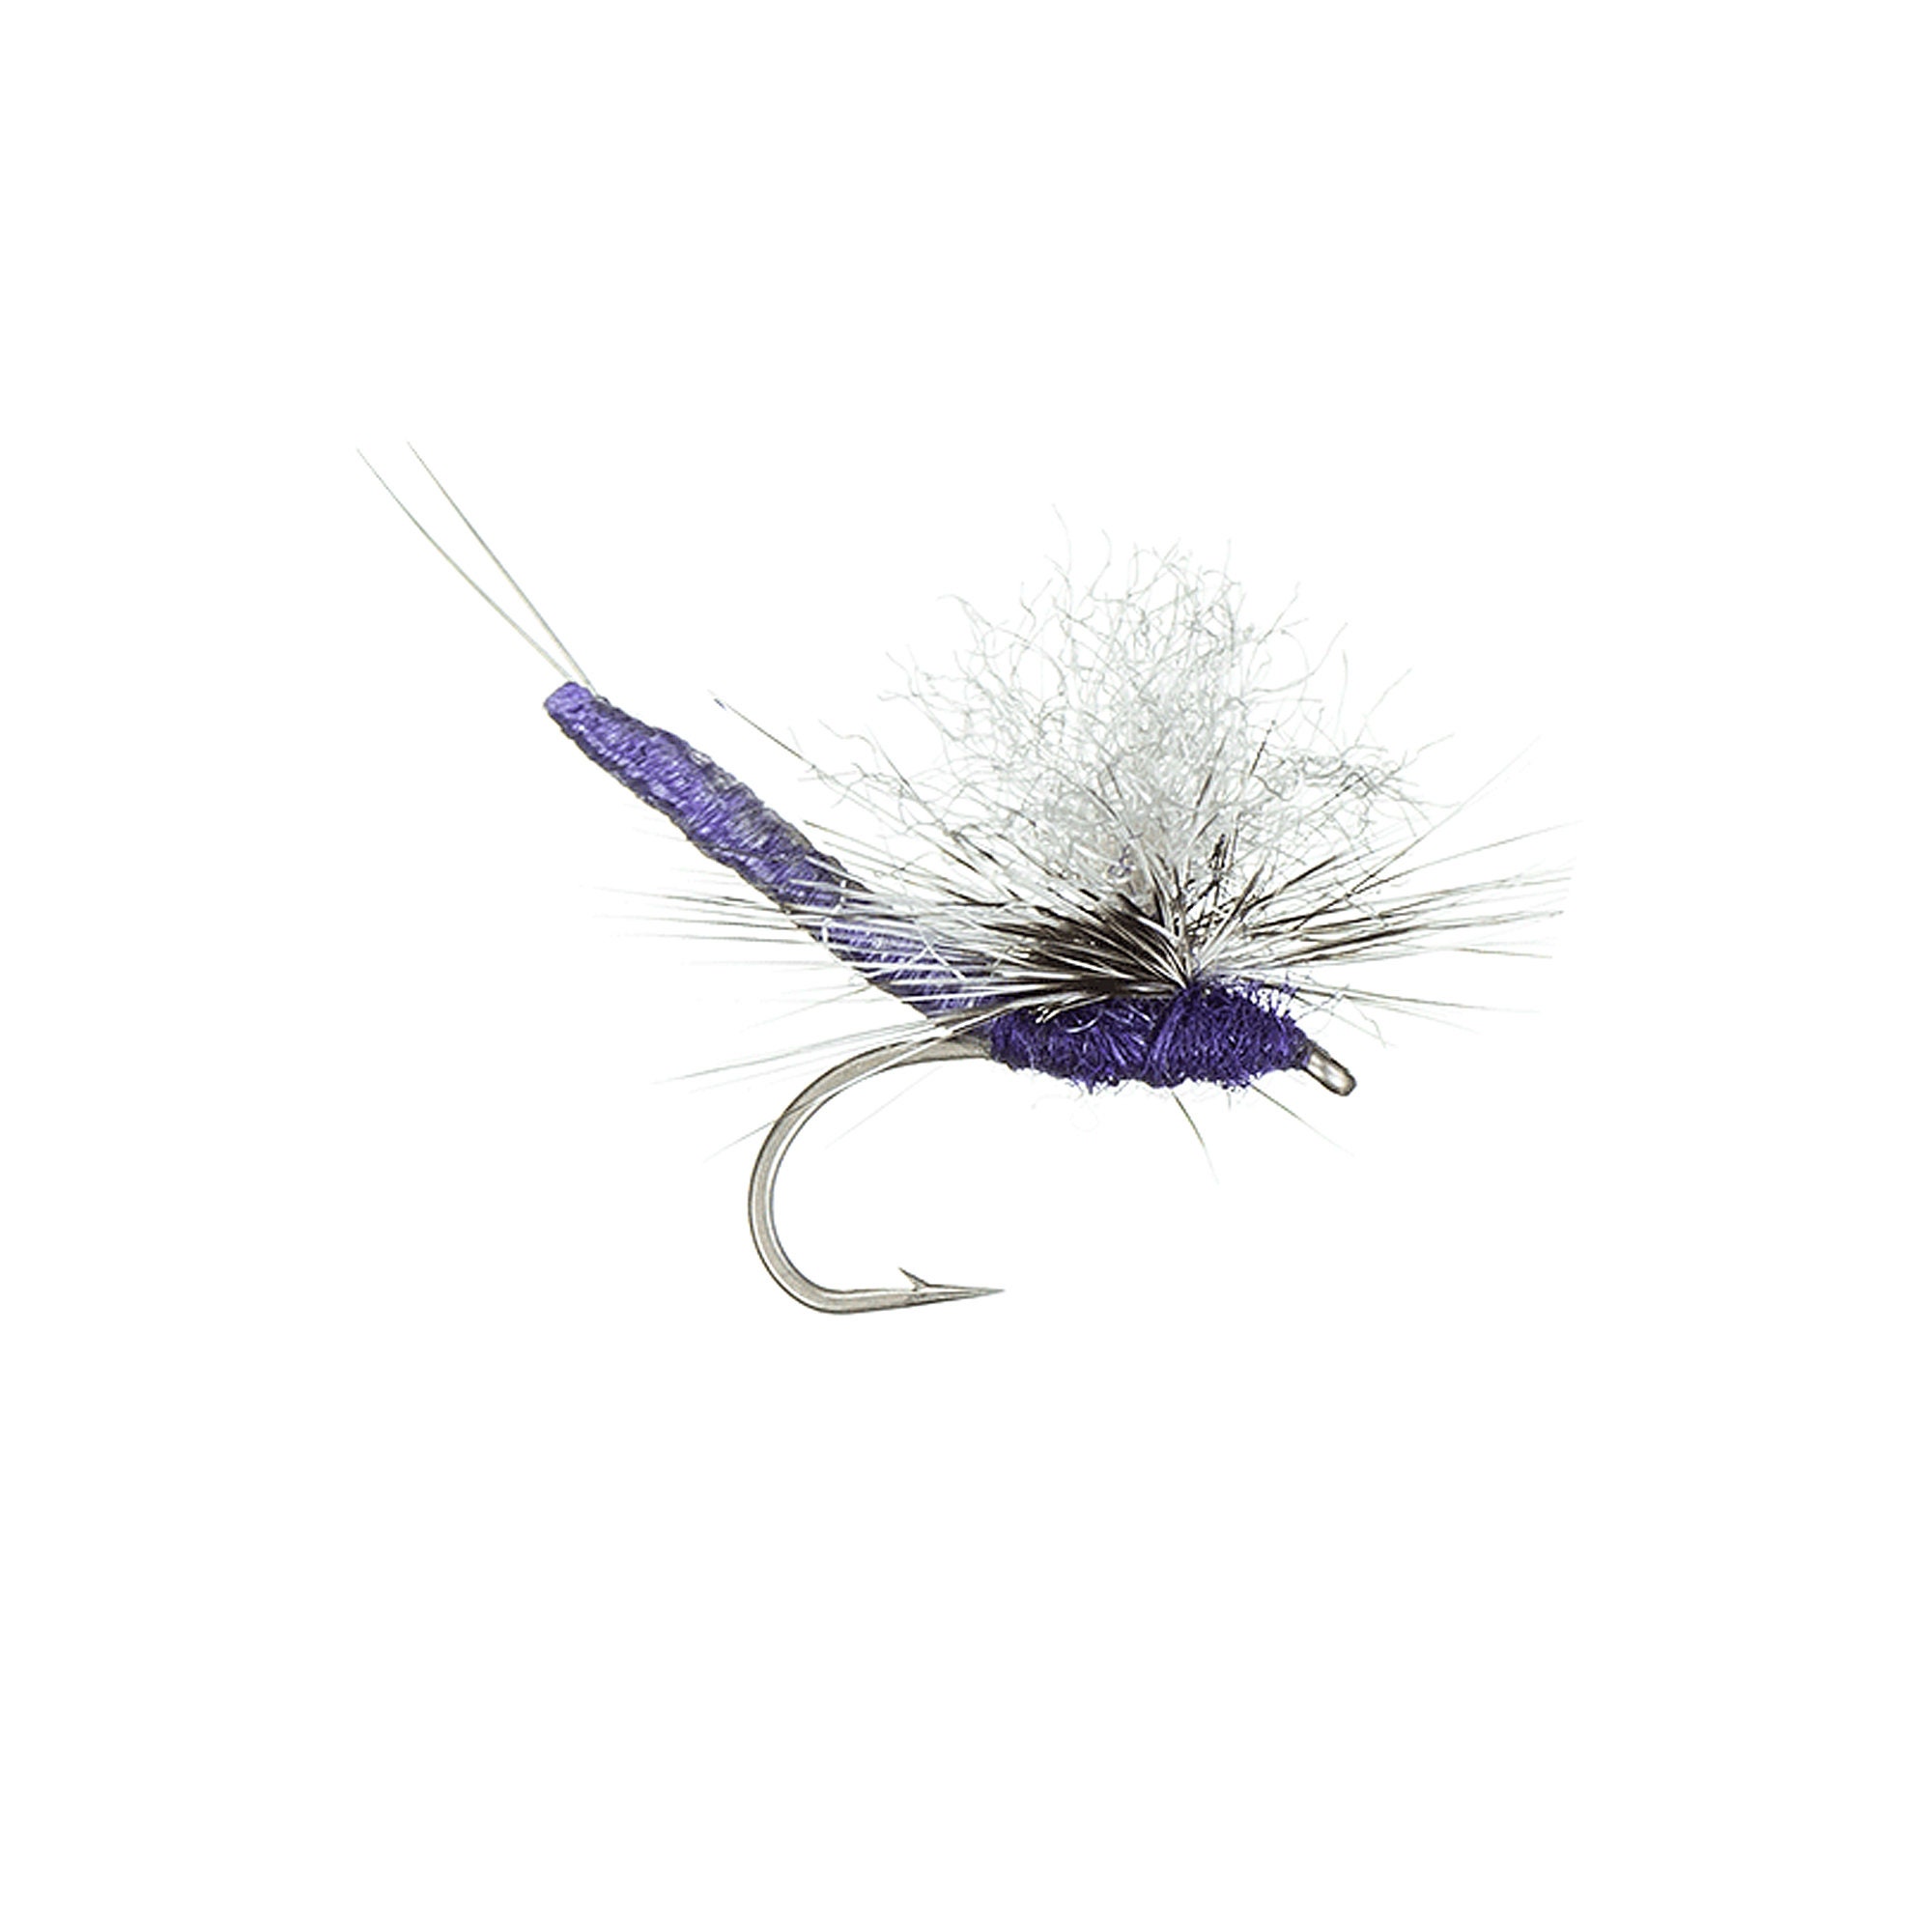 Fly Fishing Flies Perfect Purple Para-wulff Top Dry Fly Patterns Hand Tied Fly  Fishing Flies 3 Pack of Dry Flies -  Finland